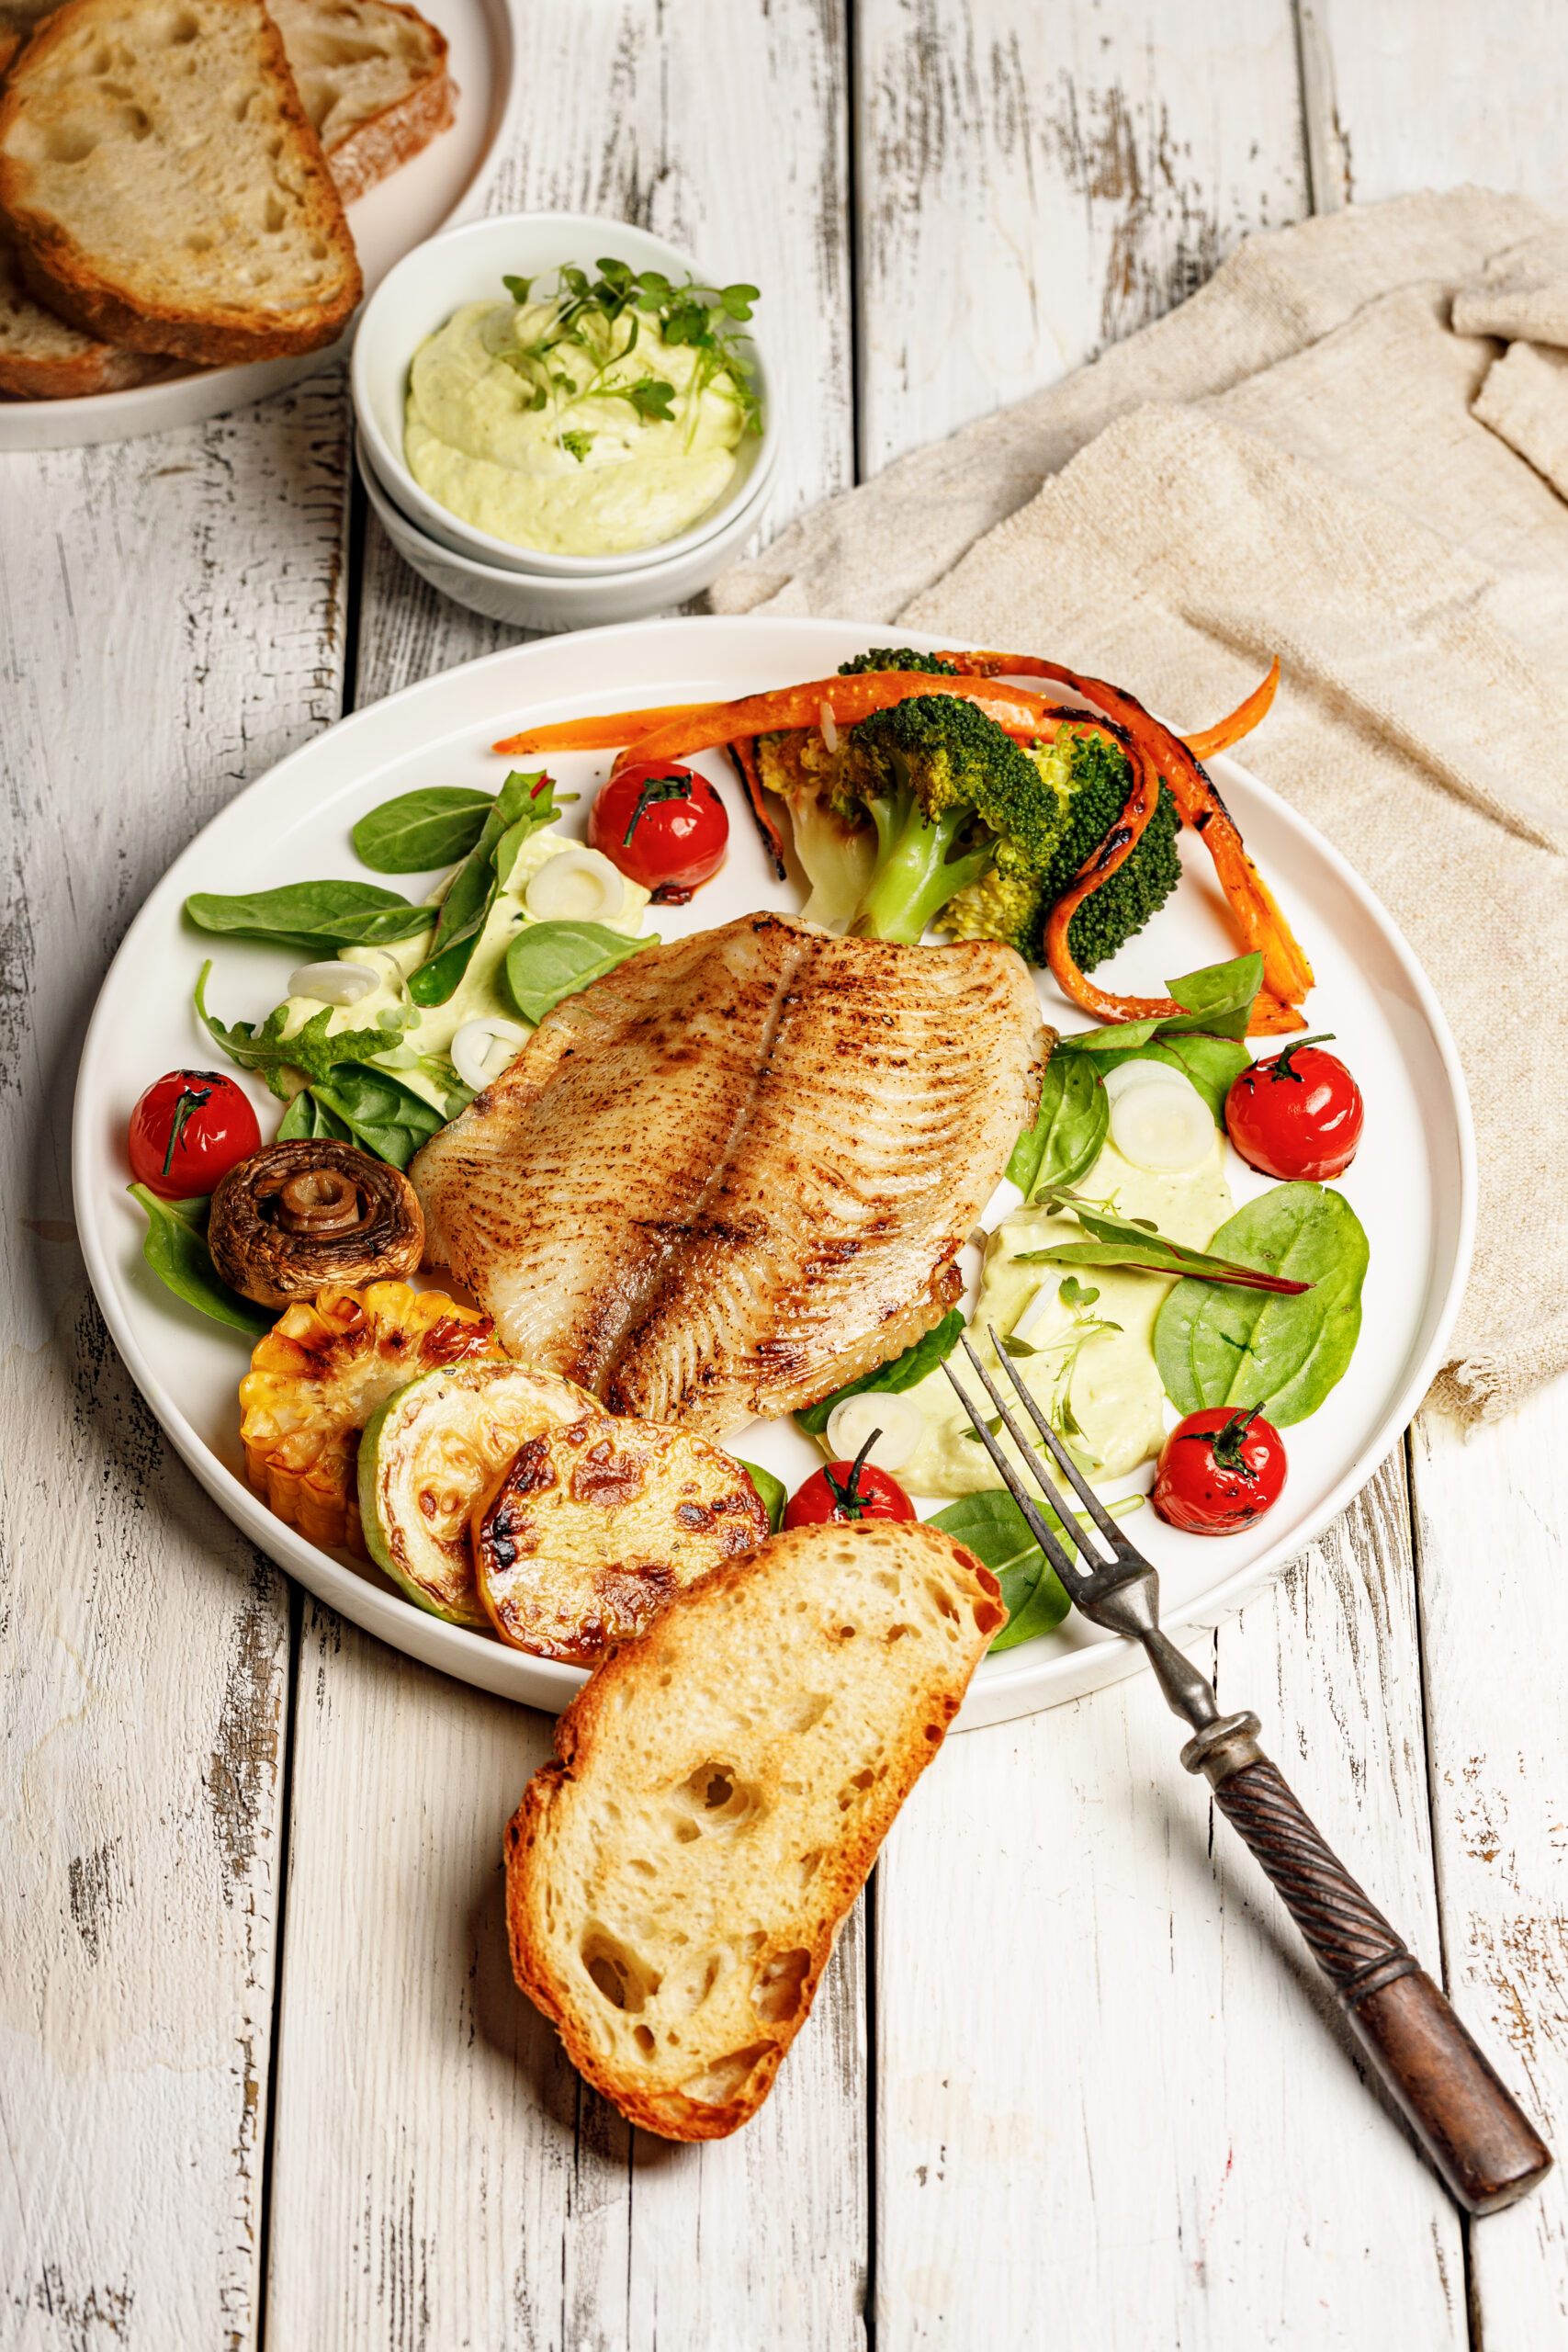 Fried sea fish and vegetables. Tilapia fillet with broccoli, cherry tomatoes and lettuce. Sea food on a white plate on white background. Vertical shot